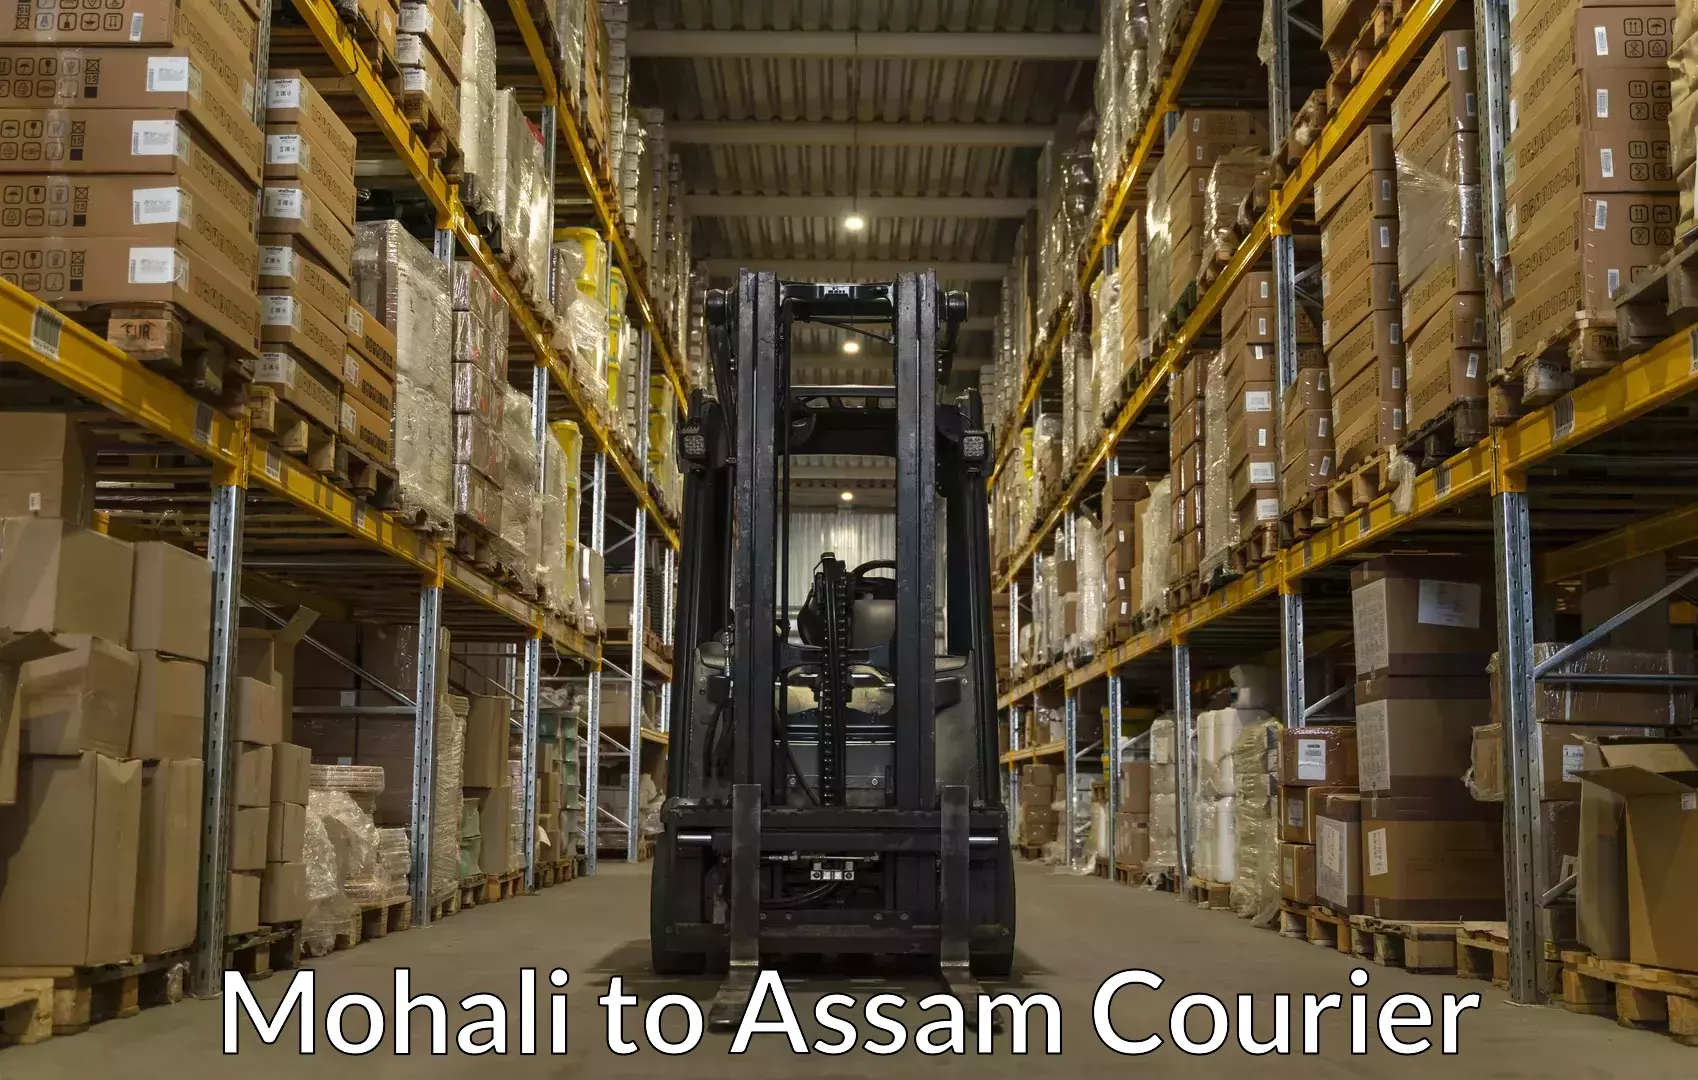 Luggage shipment strategy Mohali to Assam